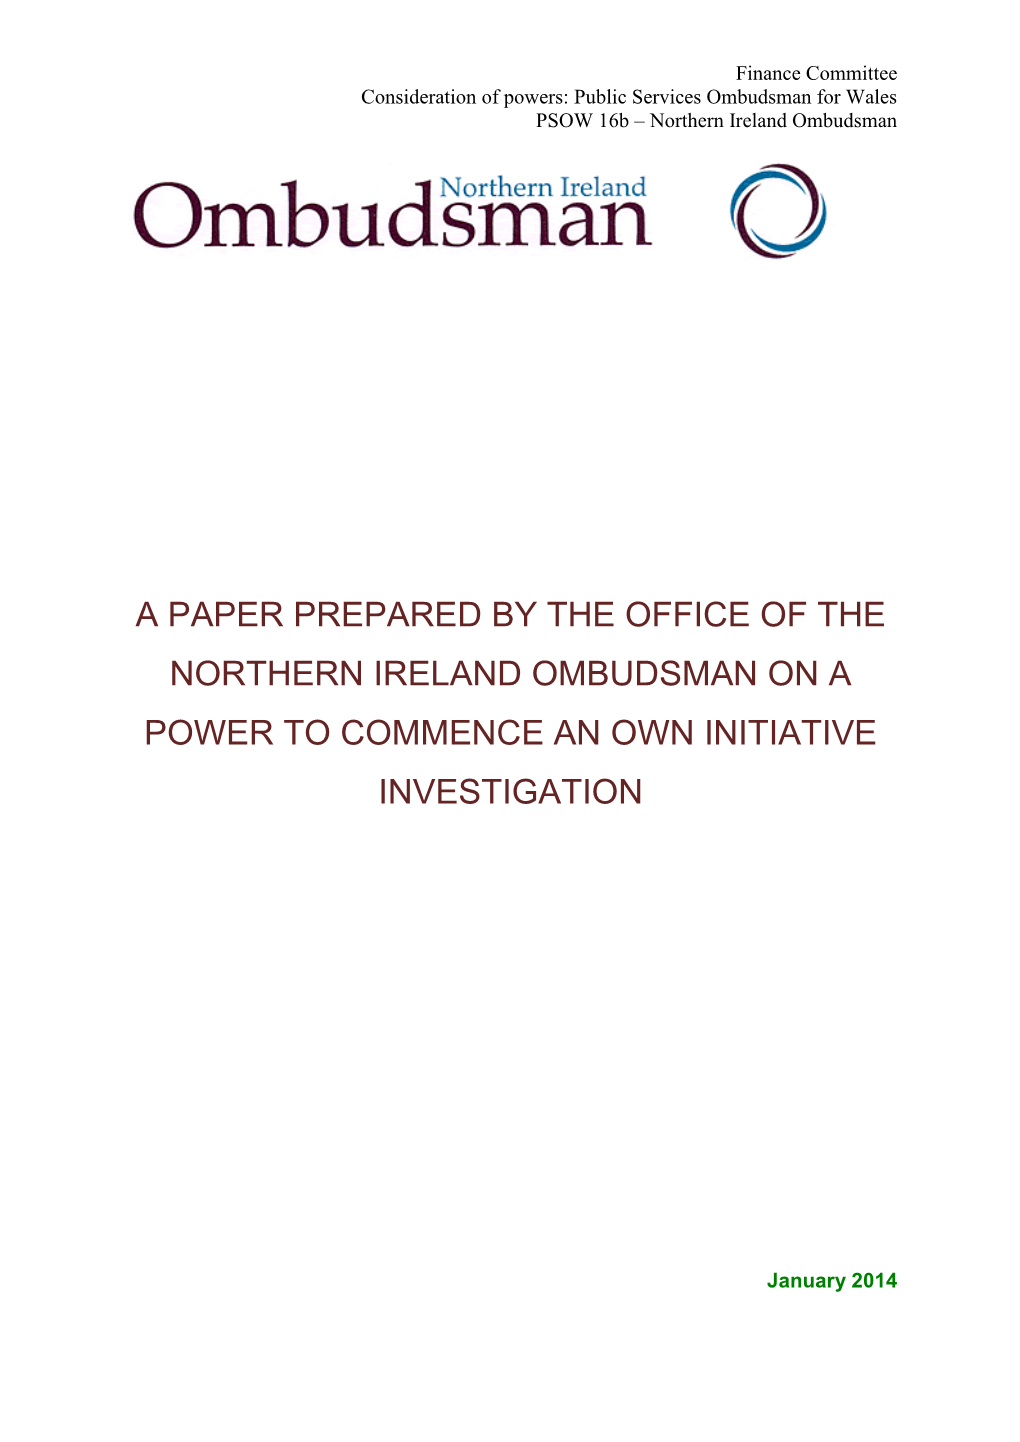 A Paper Prepared by the Office of the Northern Ireland Ombudsman on a Power to Commence an Own Initiative Investigation